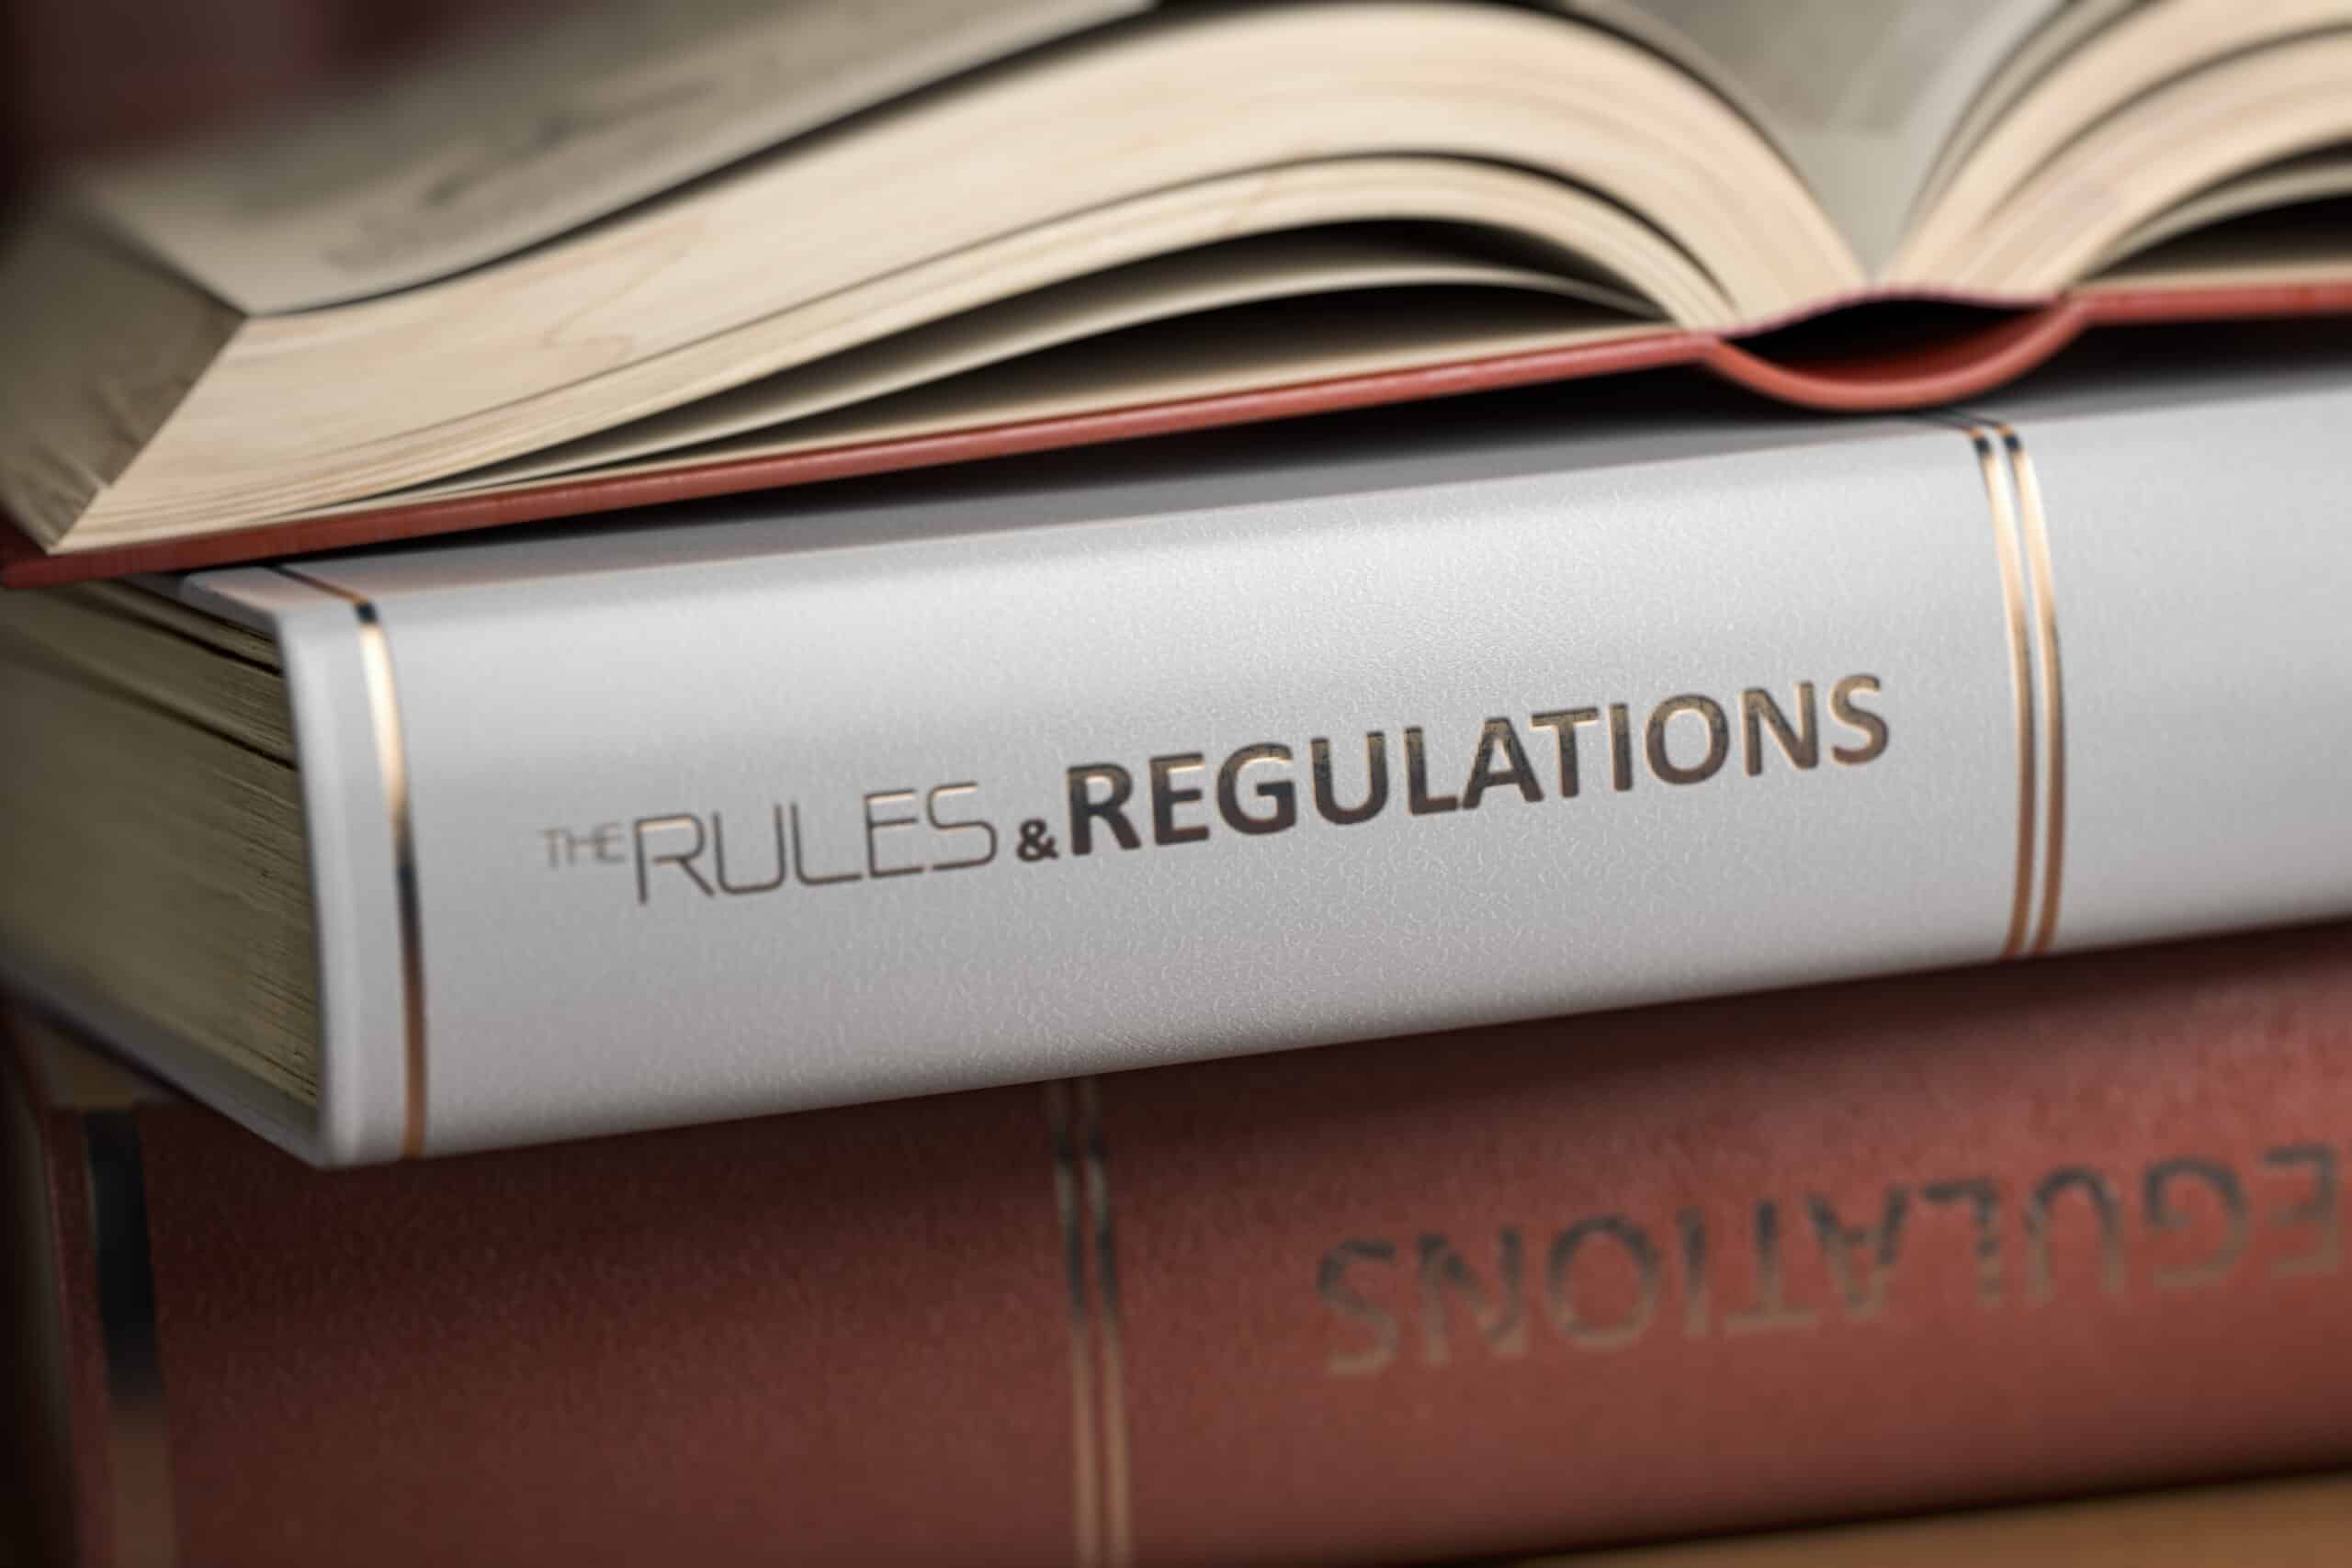 rules-and-regulations-book-law-rules-and-regulations-concept